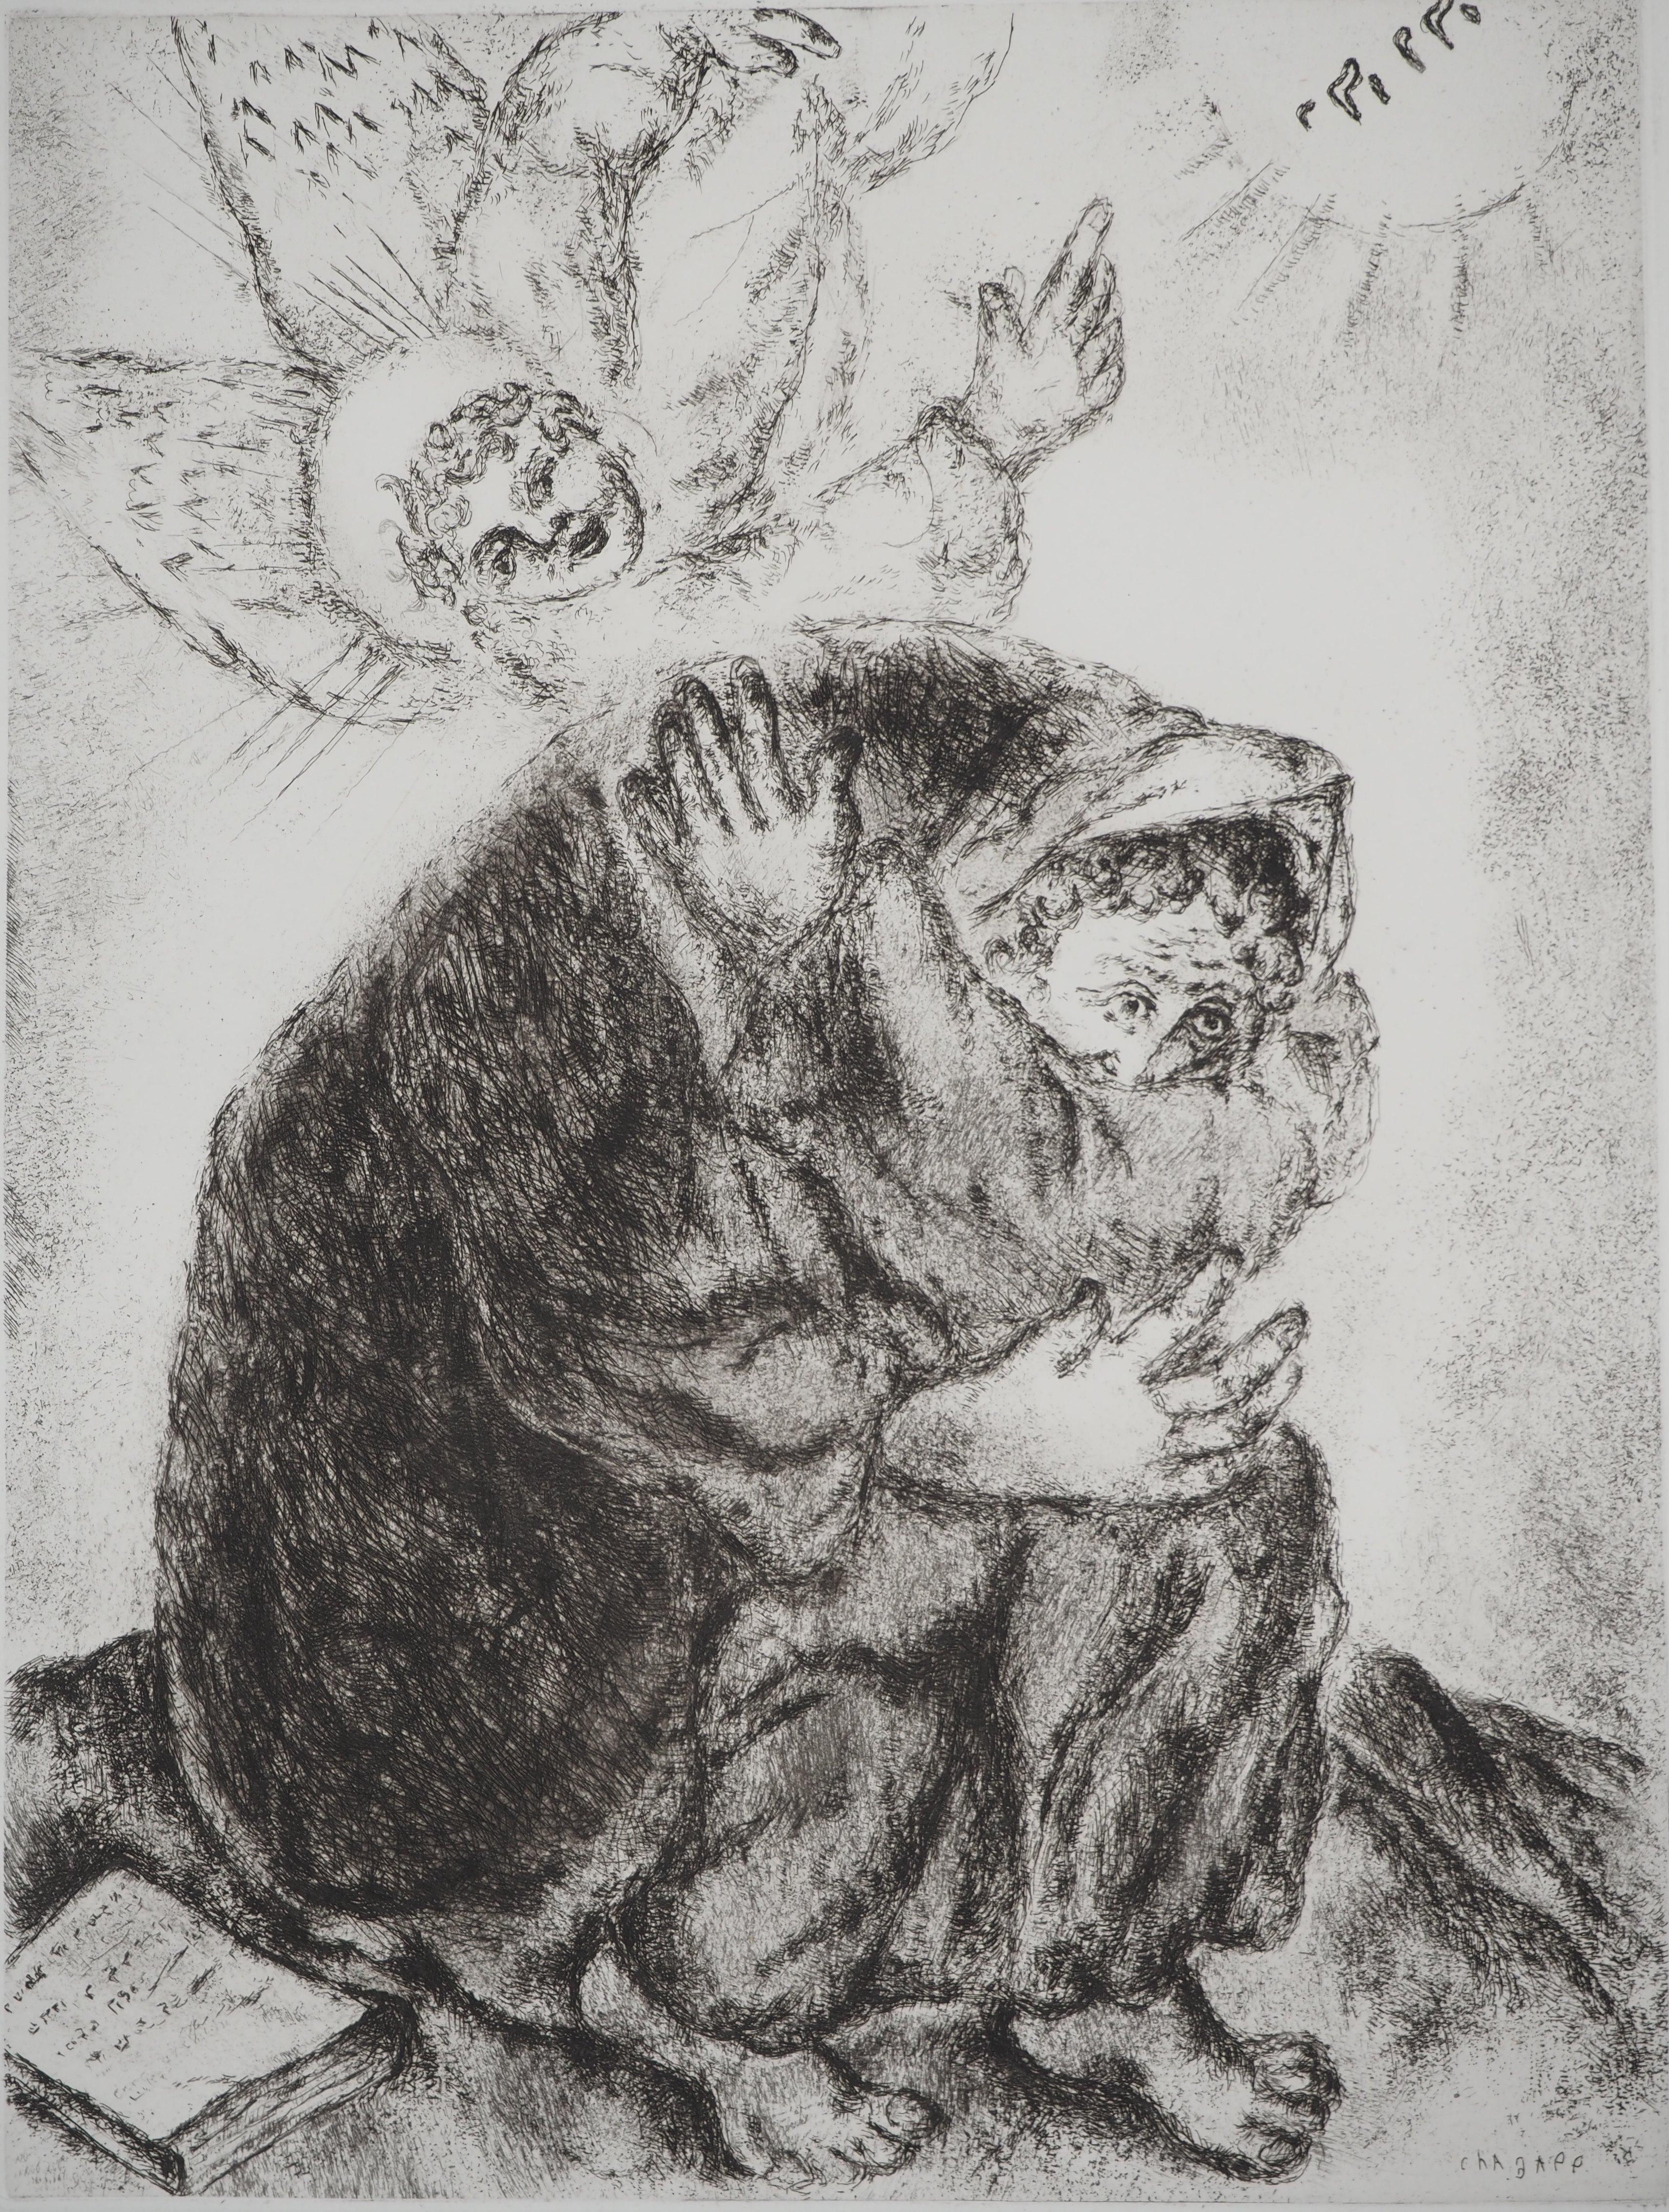 Marc Chagall (1887-1958)
Bible : Isaiah's prayer, (Prière d'Esaïe), 1939

Original etching
Printed signature in the plate
On Montval vellum, 44 x 33.5 cm (c. 17.3 x 13.1 inch)

INFORMATION: Published by Vollard / Tériade in 1956

REFERENCE: